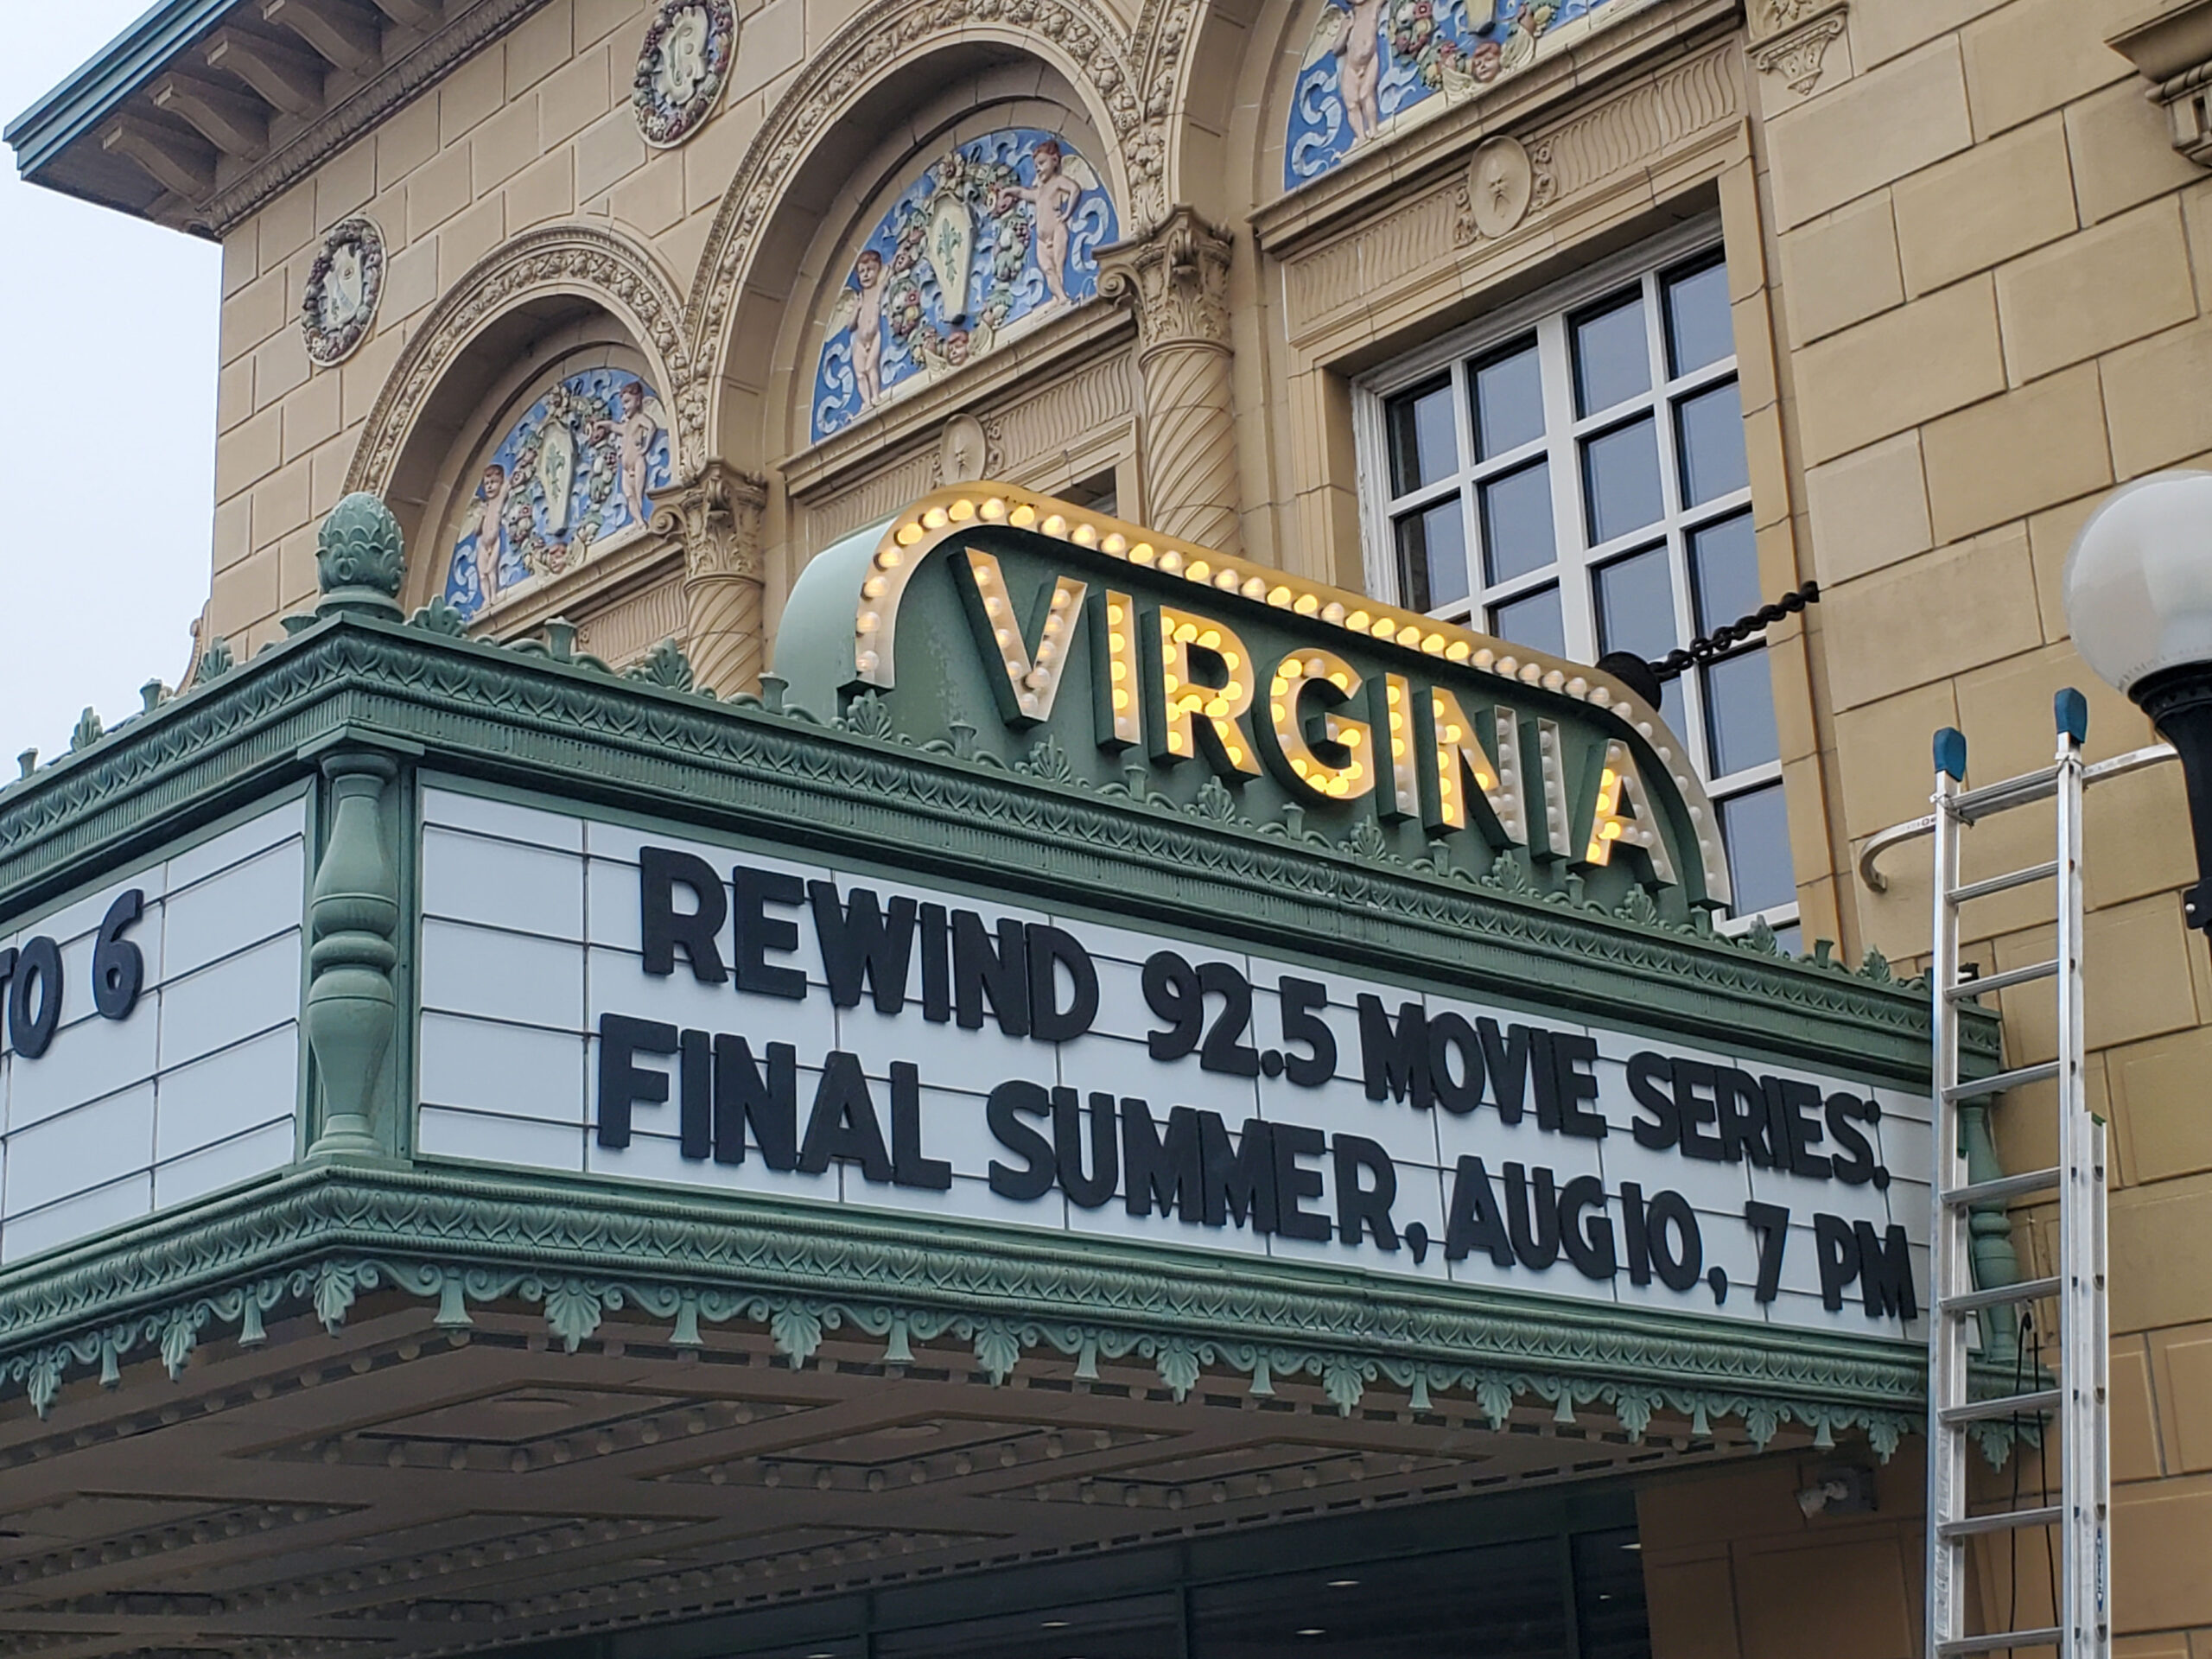 The Virginia Theater marquee reads "REWIND 92.5 MOVIE SERIES FINAL SUMMER, SUG. 10, 7PM."